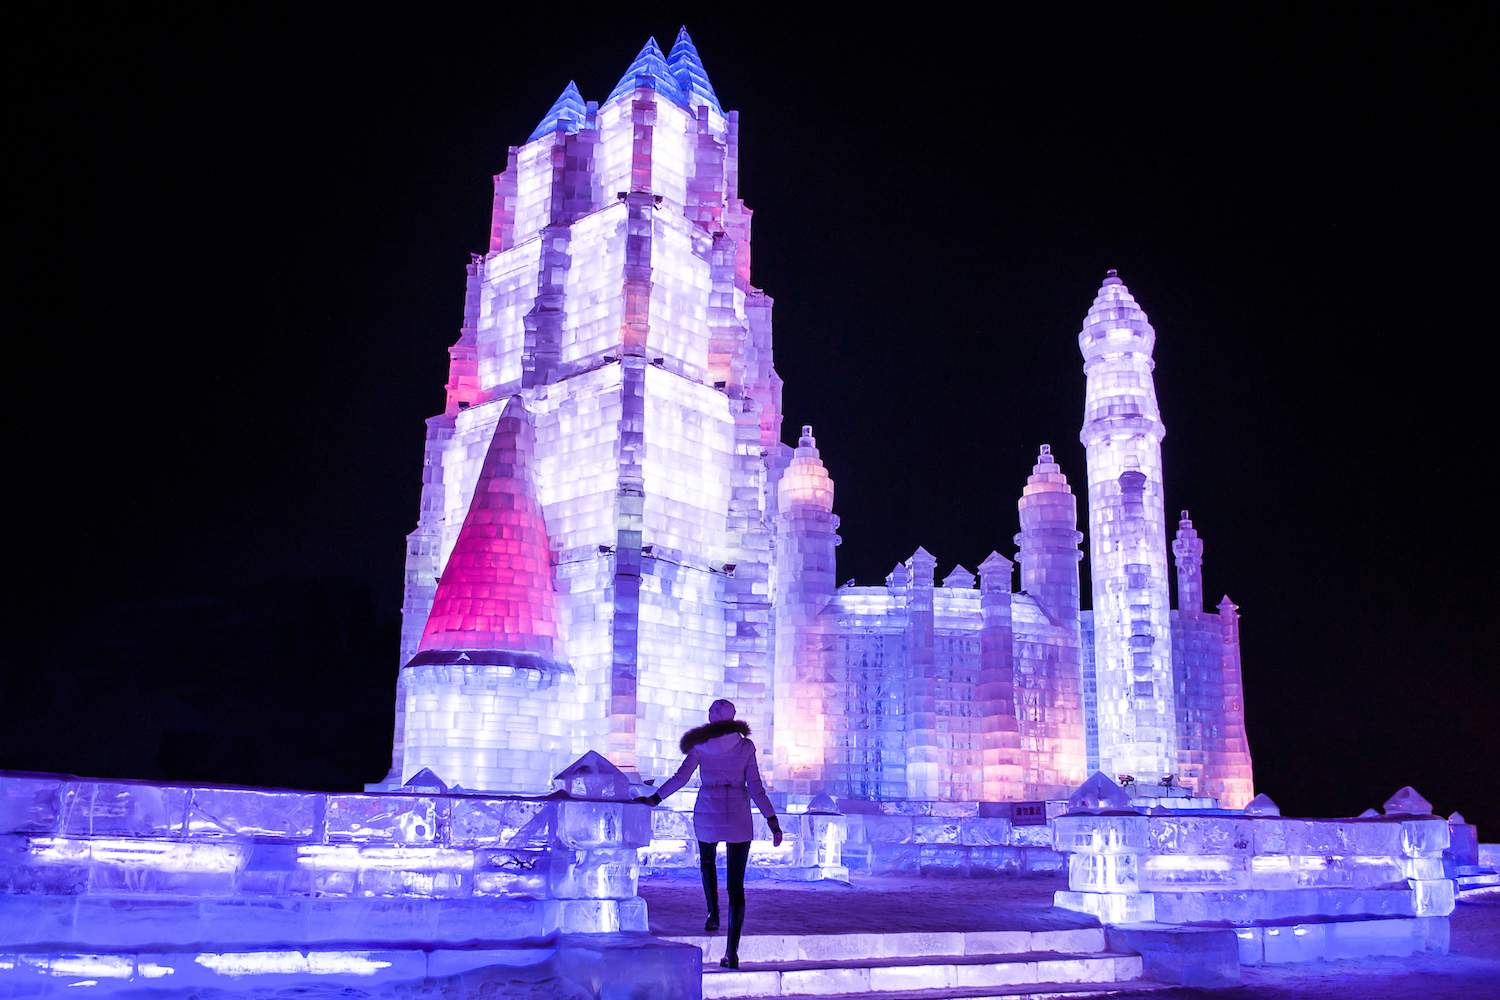 An Ice Castle in Harbin, China was one of the best things to see!